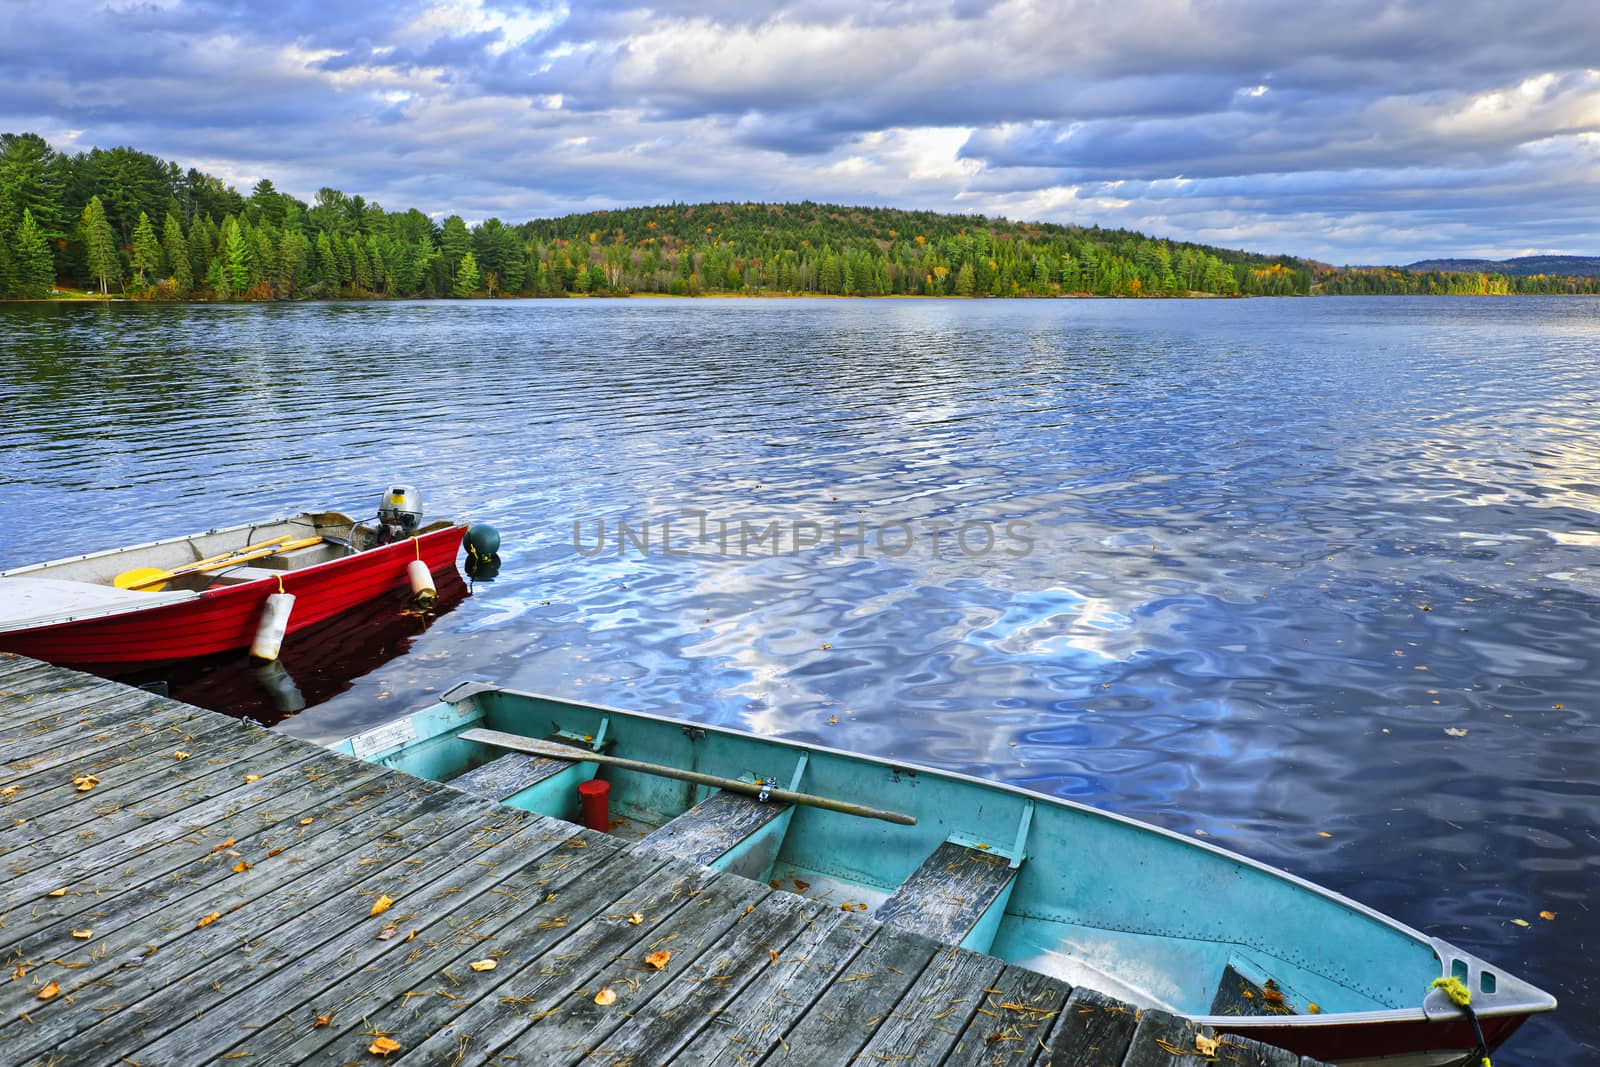 Rowboats docked on Lake of Two Rivers in Algonquin Park, Ontario, Canada